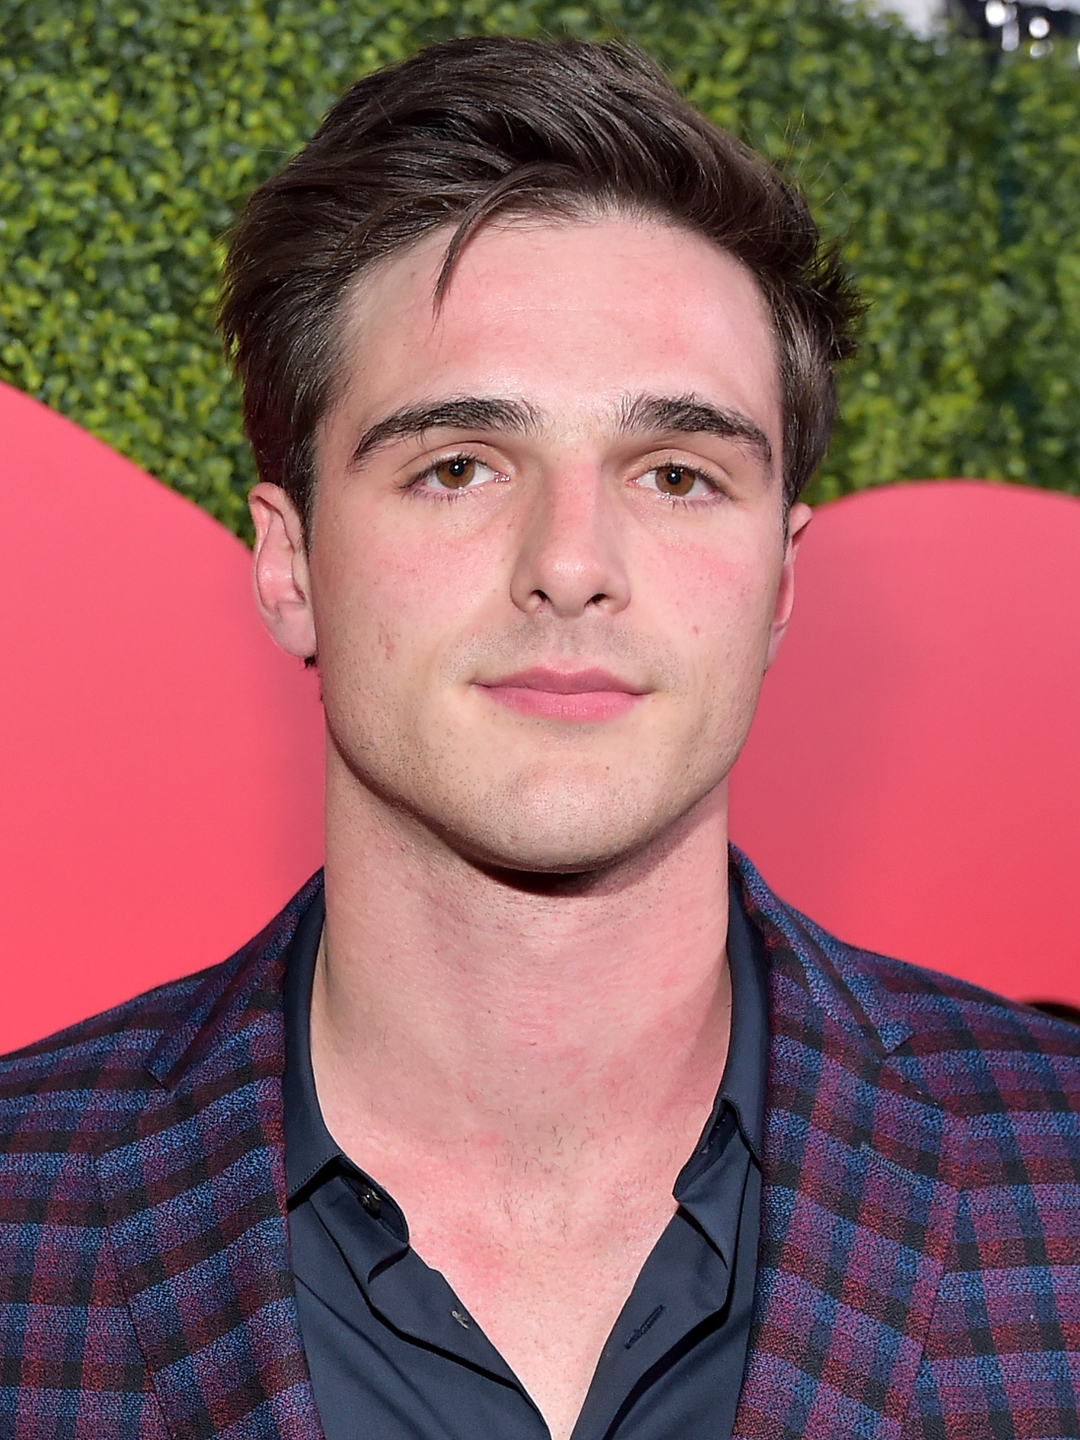 Jacob Elordi who is his father